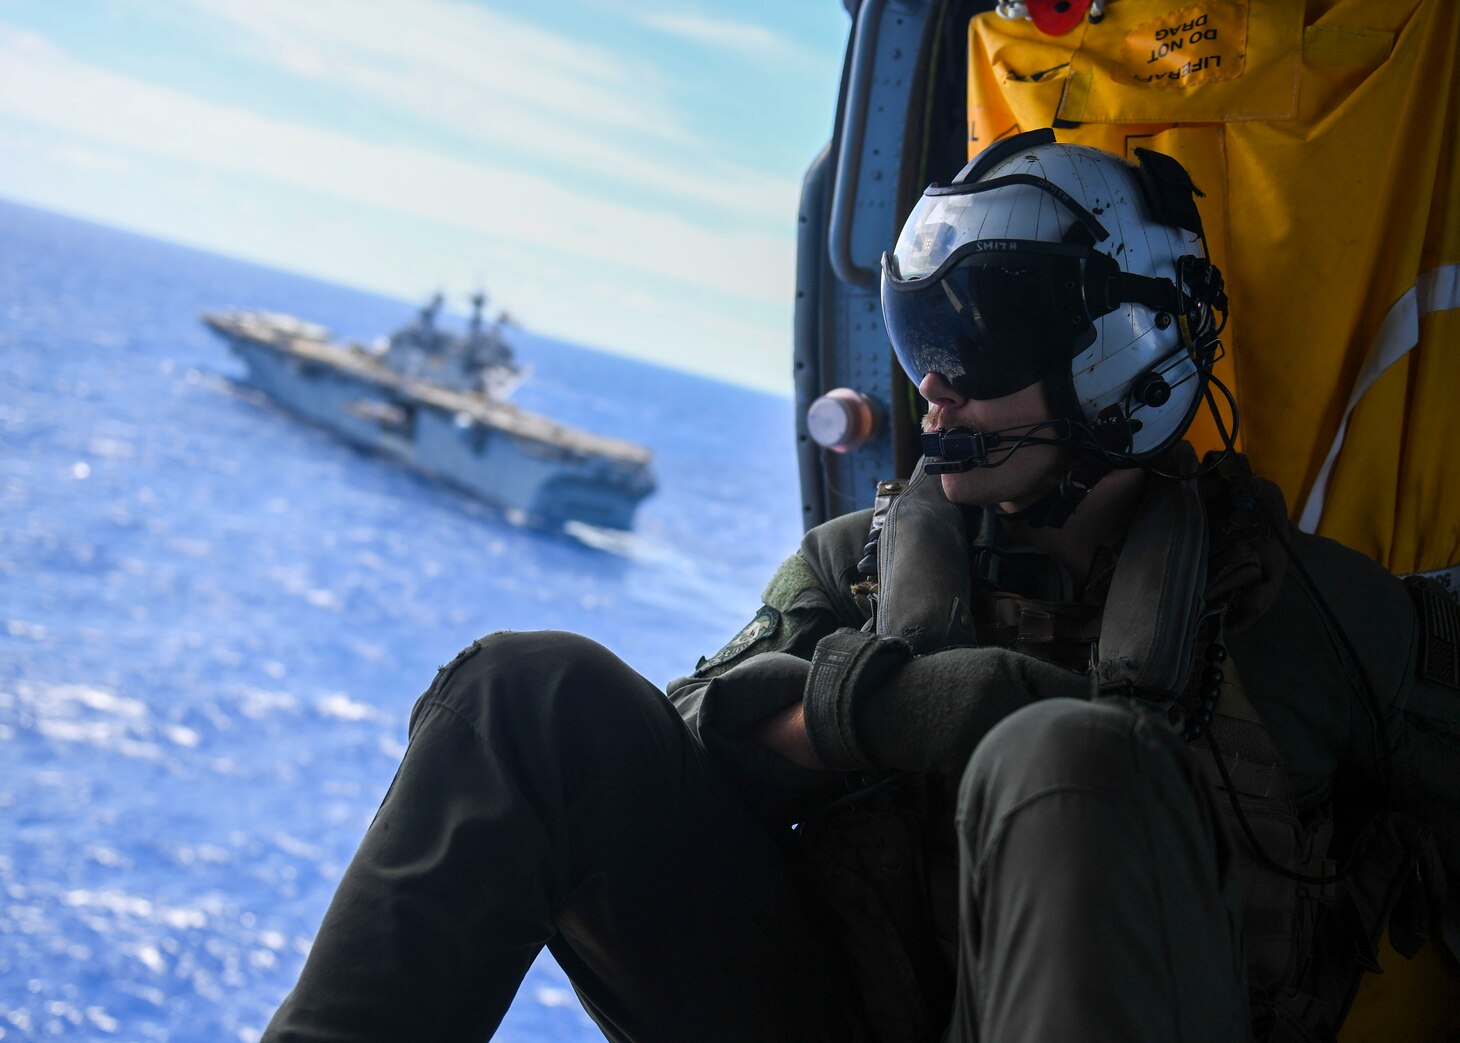 PACIFIC OCEAN (July 21, 2018) – Naval Aircrewman (Helicopter) 2nd Class Erick Smith, assigned to the “Blackjacks” of Helicopter Sea Combat Squadron (HSC) 21, rides in an MH-60S Sea Hawk helicopter during a vertical replenishment with Wasp-class amphibious assault ship USS Essex (LHD 2) during a regularly scheduled deployment of Essex Amphibious Ready Group (ARG) and 13th Marine Expeditionary Unit (MEU). The Essex ARG/MEU team is a strong, flexible, responsive, and consistent force capable of maneuver warfare across all domains; it is equipped and scalable to respond to any crisis from humanitarian assistance and disaster relief to contingency operations.